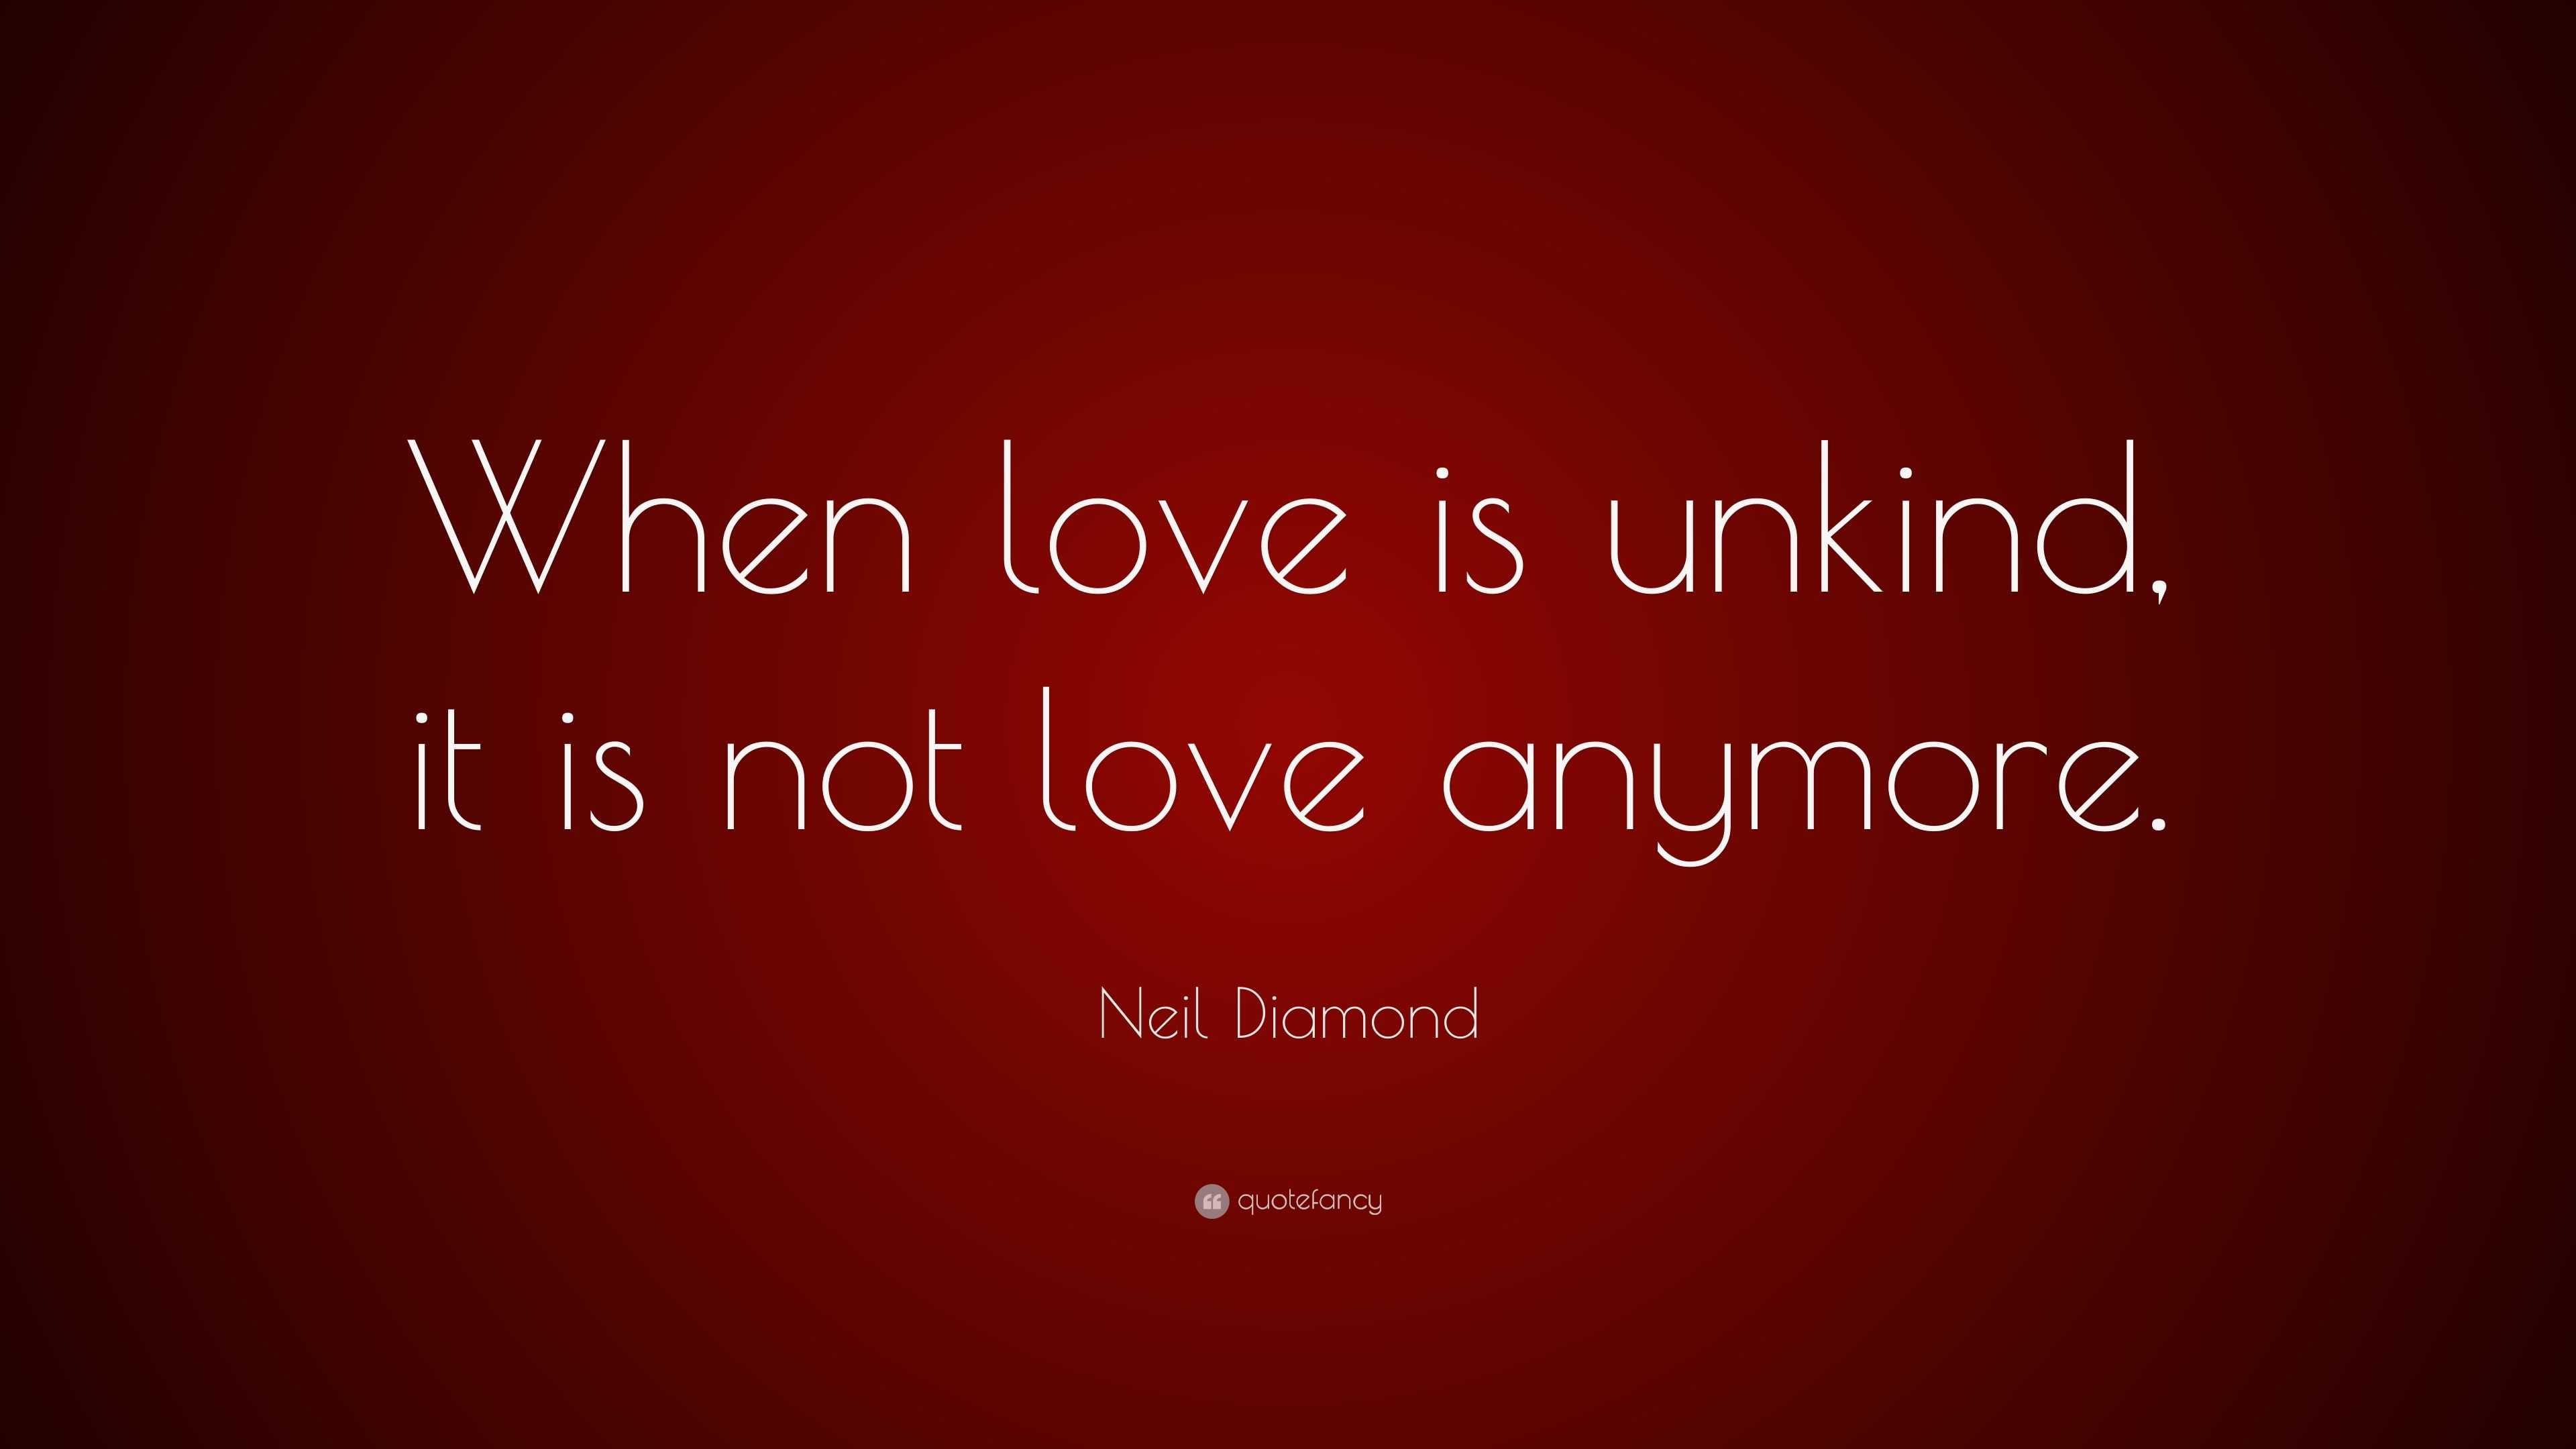 Neil Diamond Quote: “When love is unkind, it is not love anymore.”